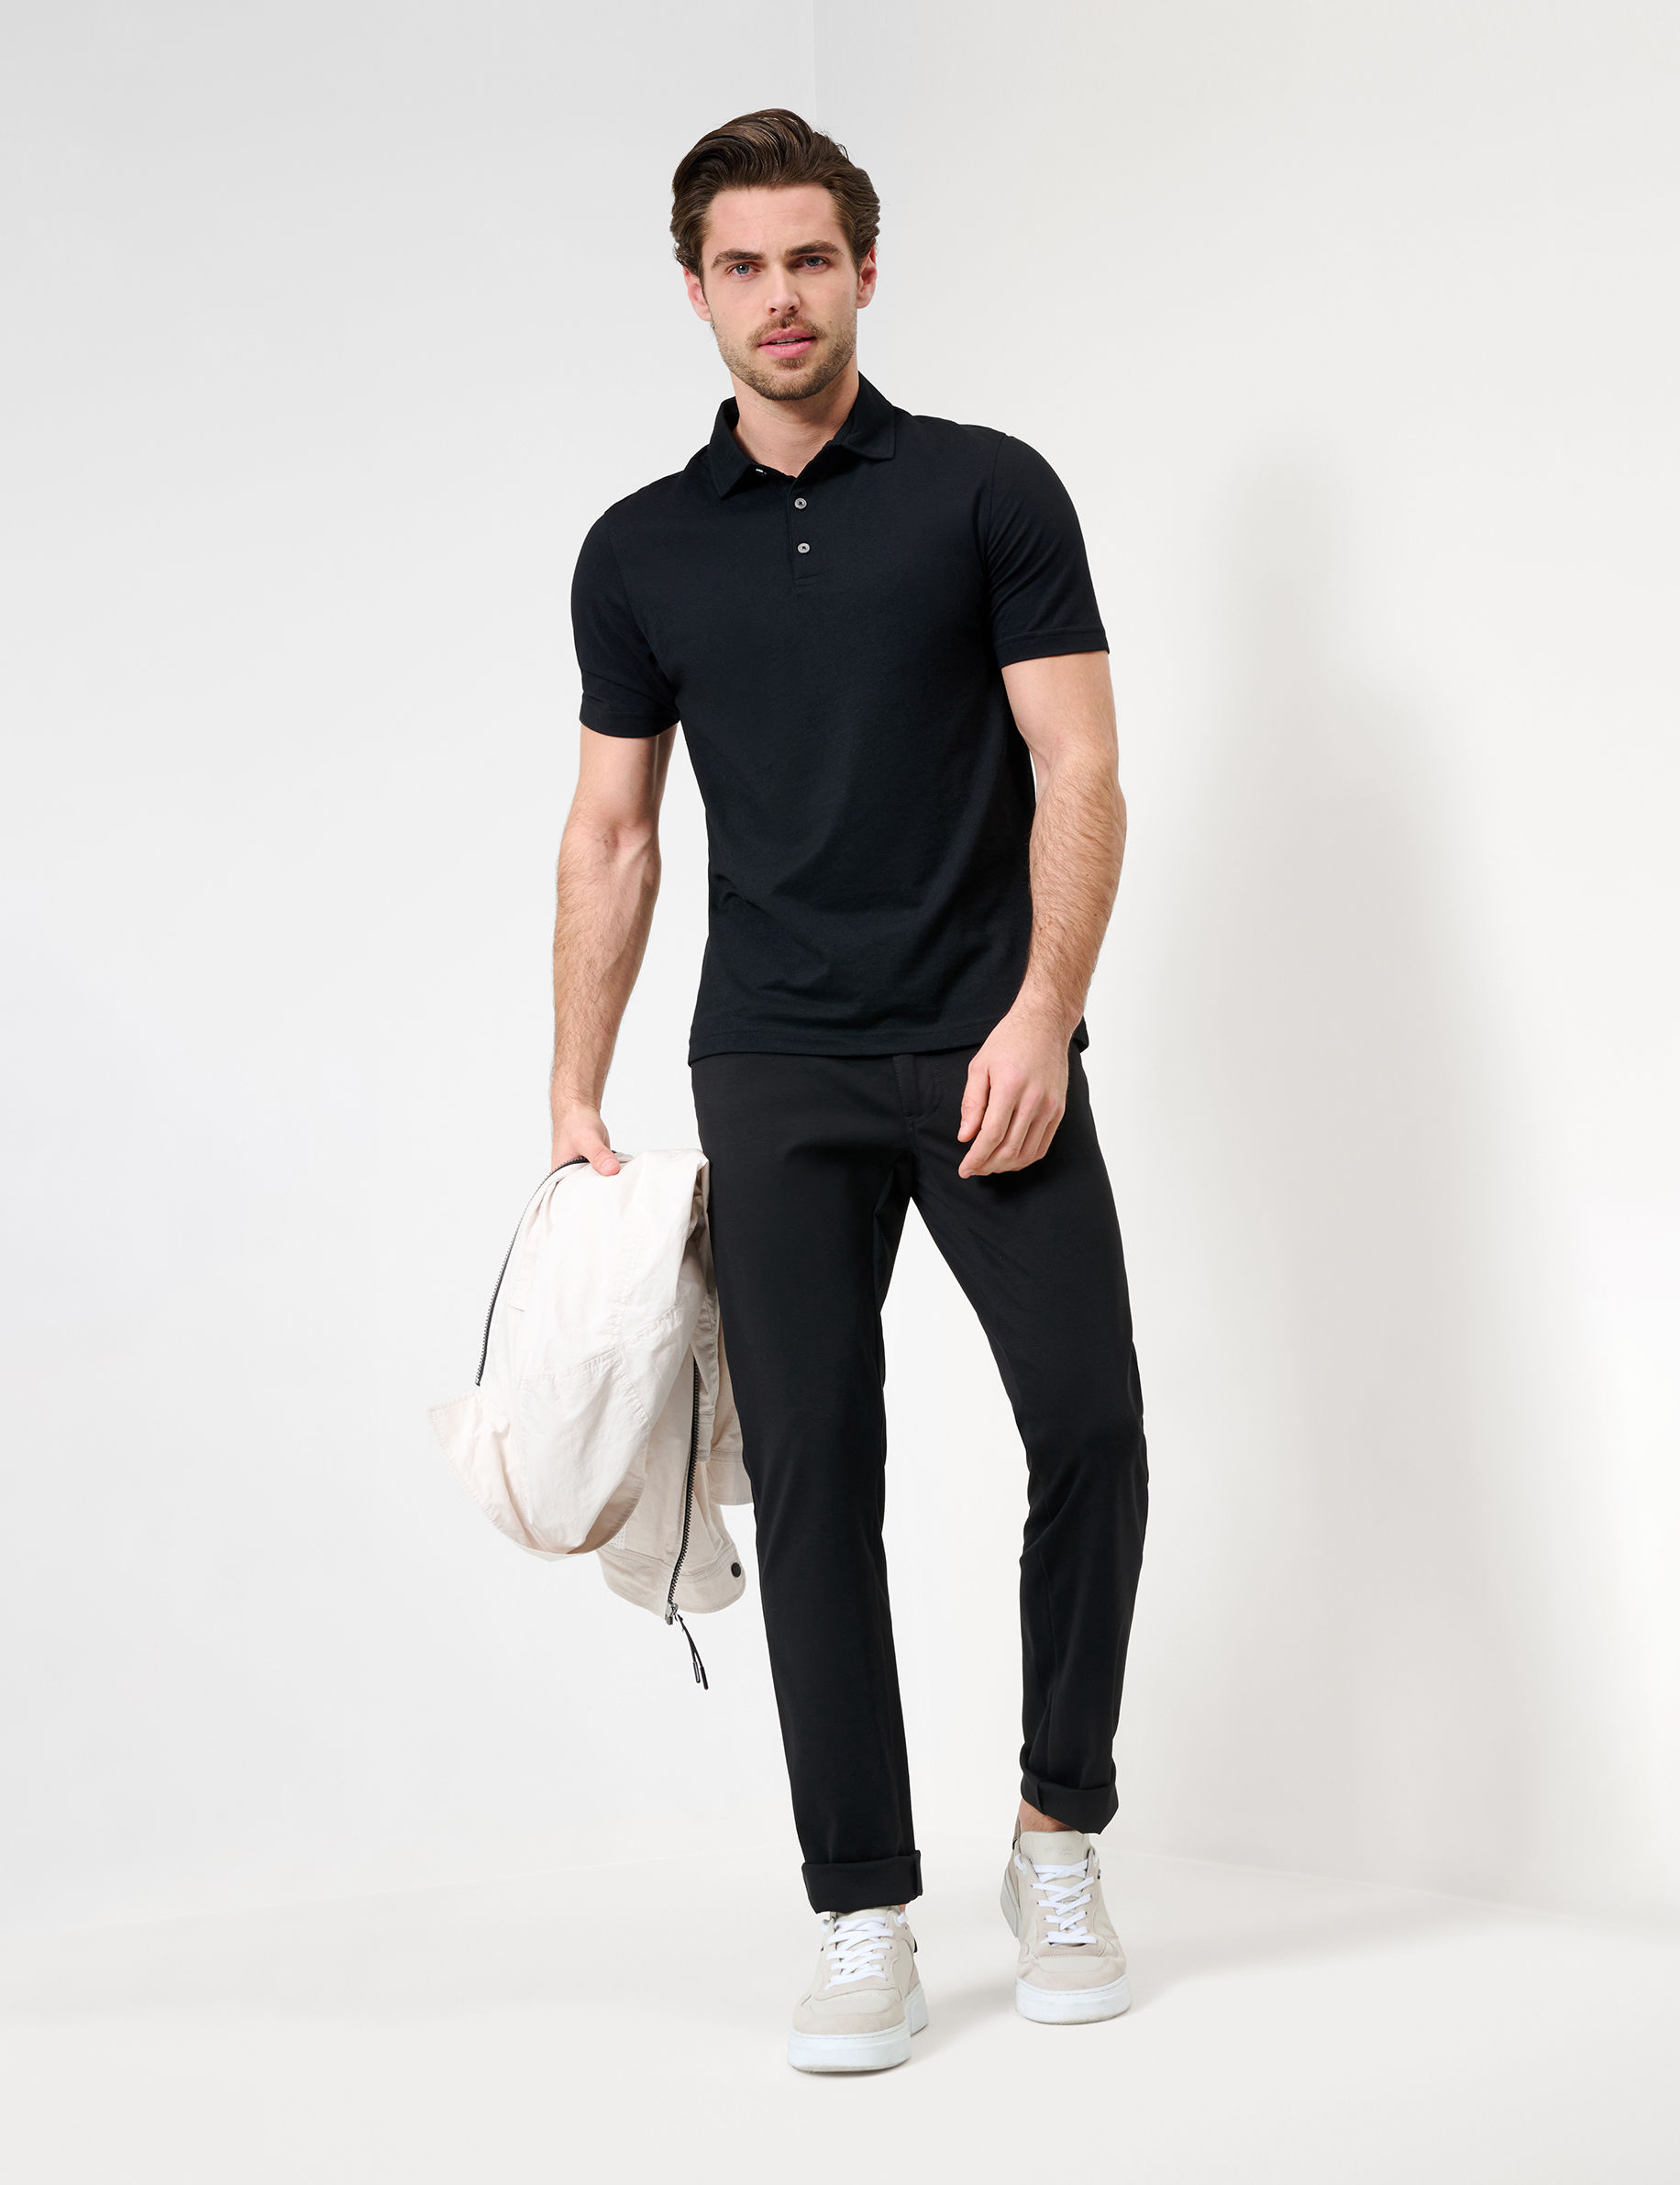 Men Style CHUCK BLACK Modern Fit Model Outfit